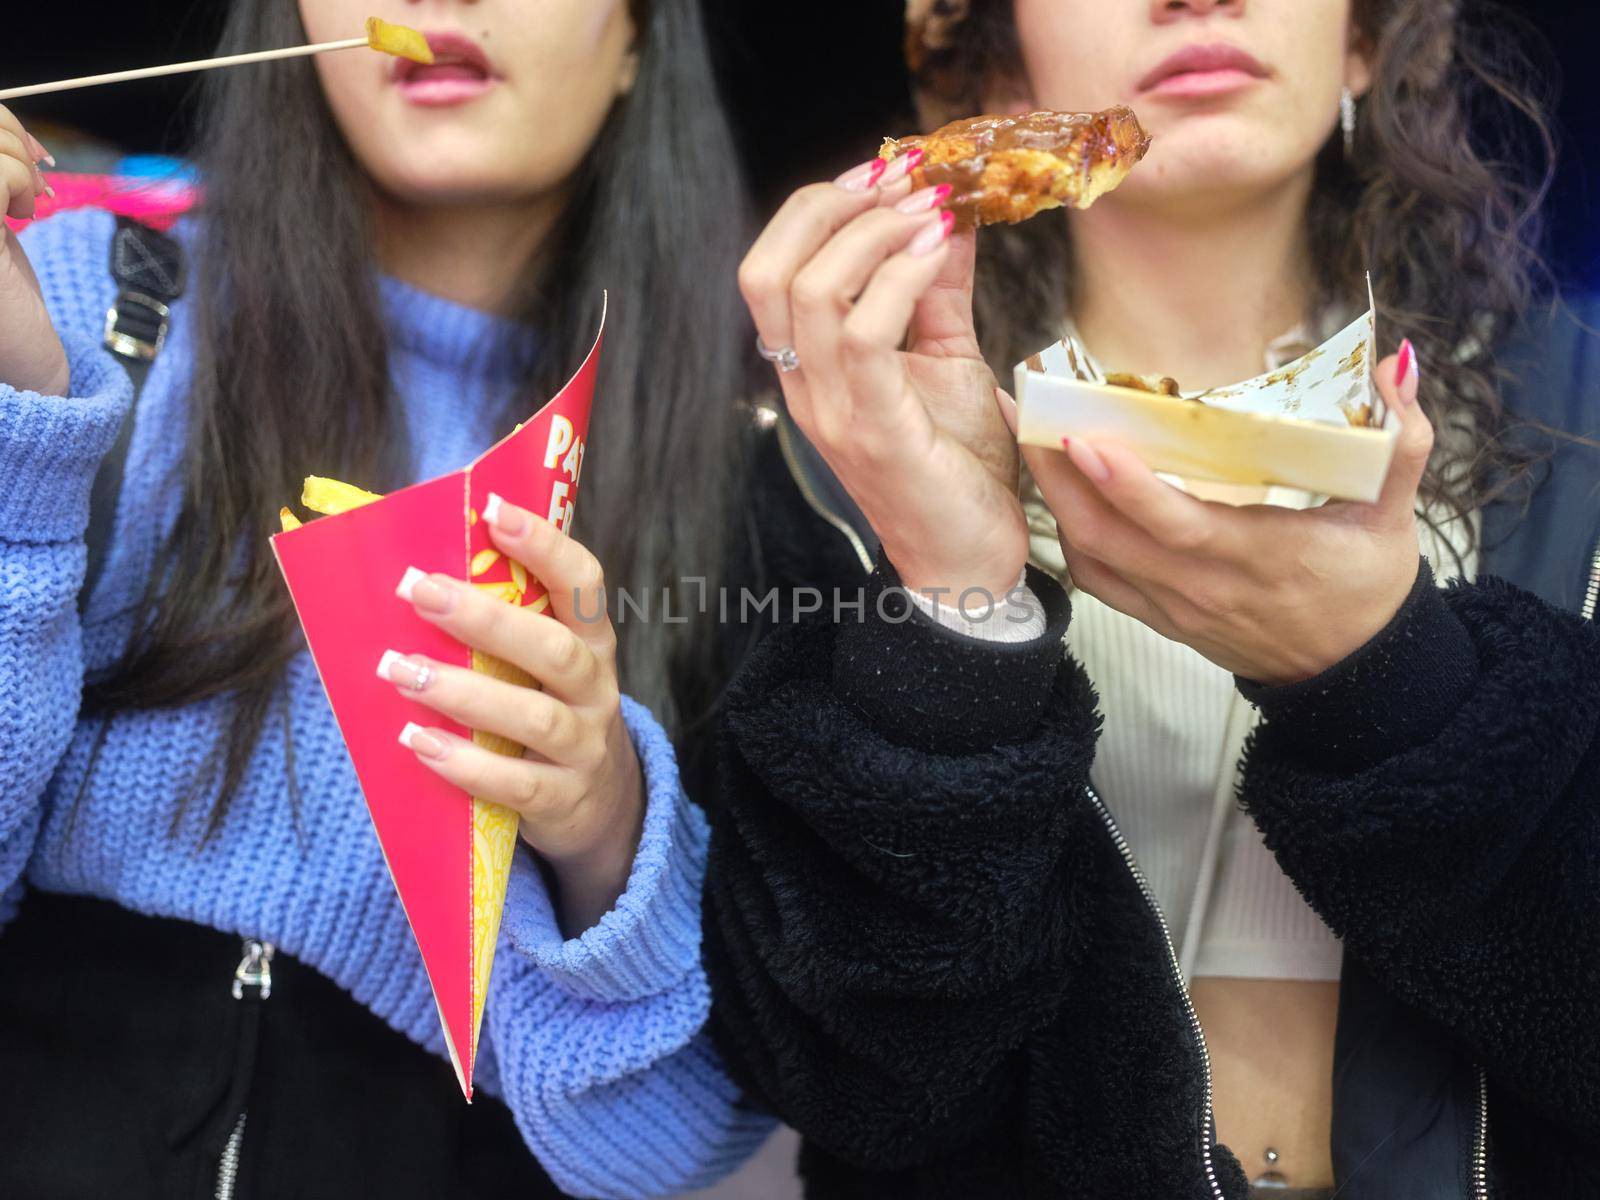 Close up view of two women eating fast food outdoors by WesternExoticStockers